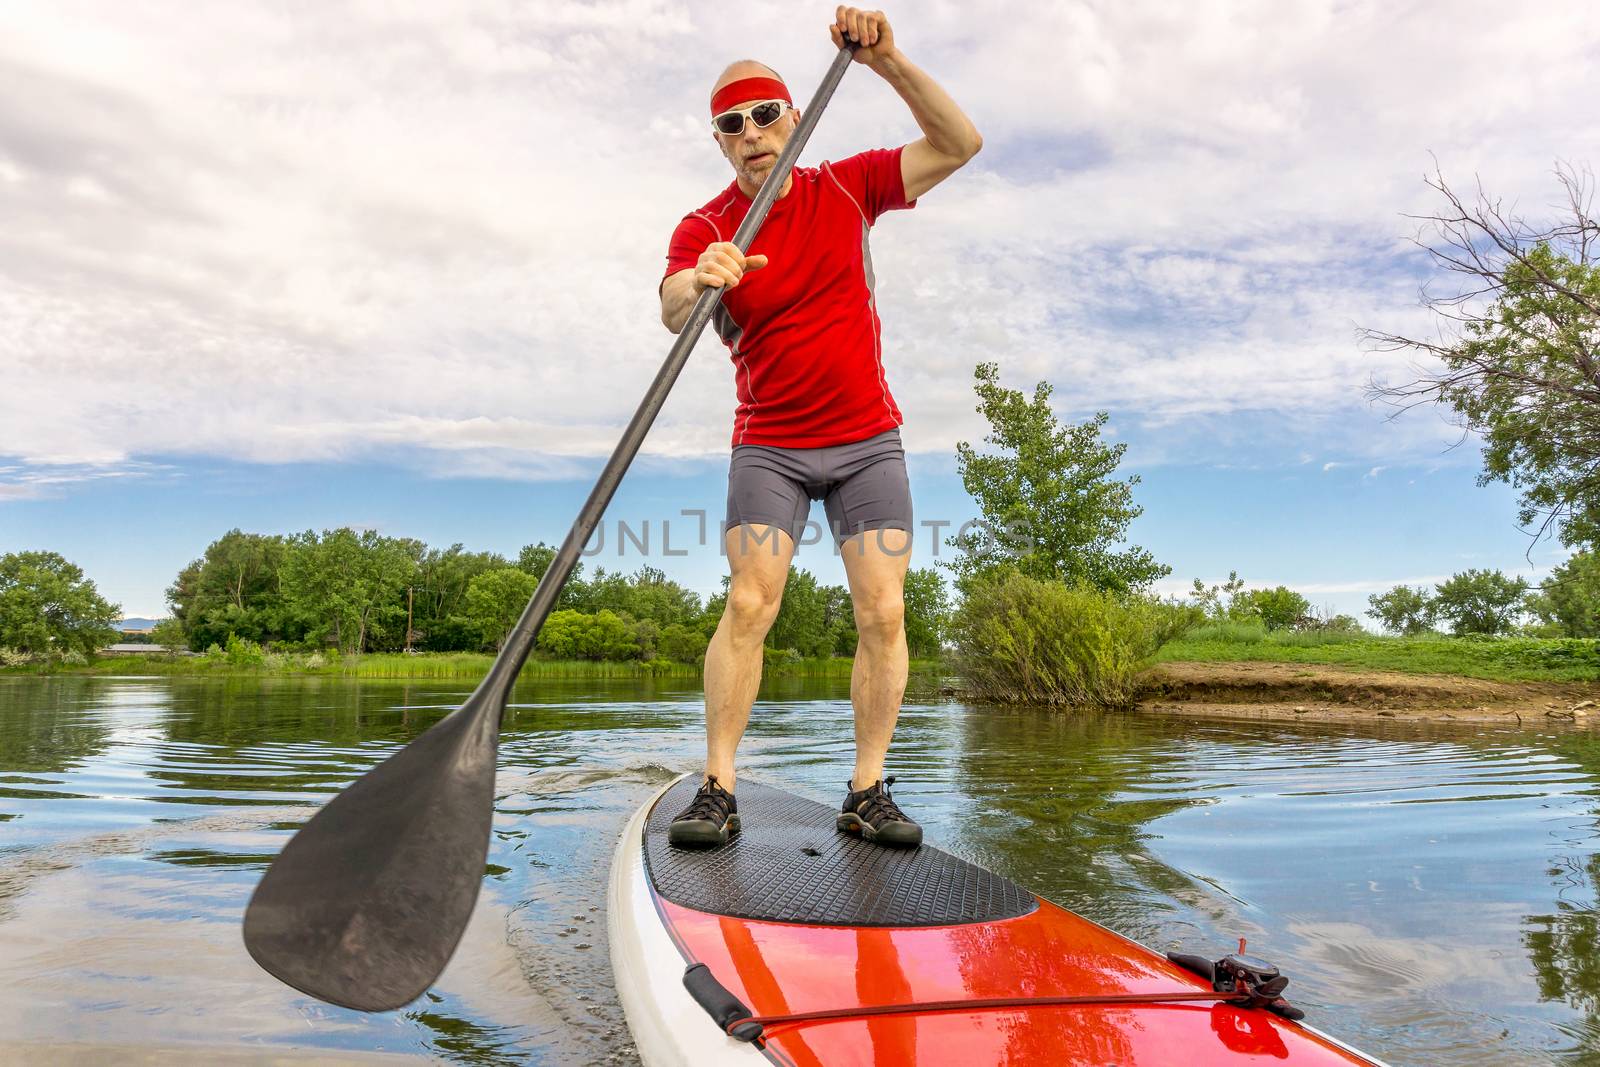 stand up paddling on a lake in Colorado by PixelsAway